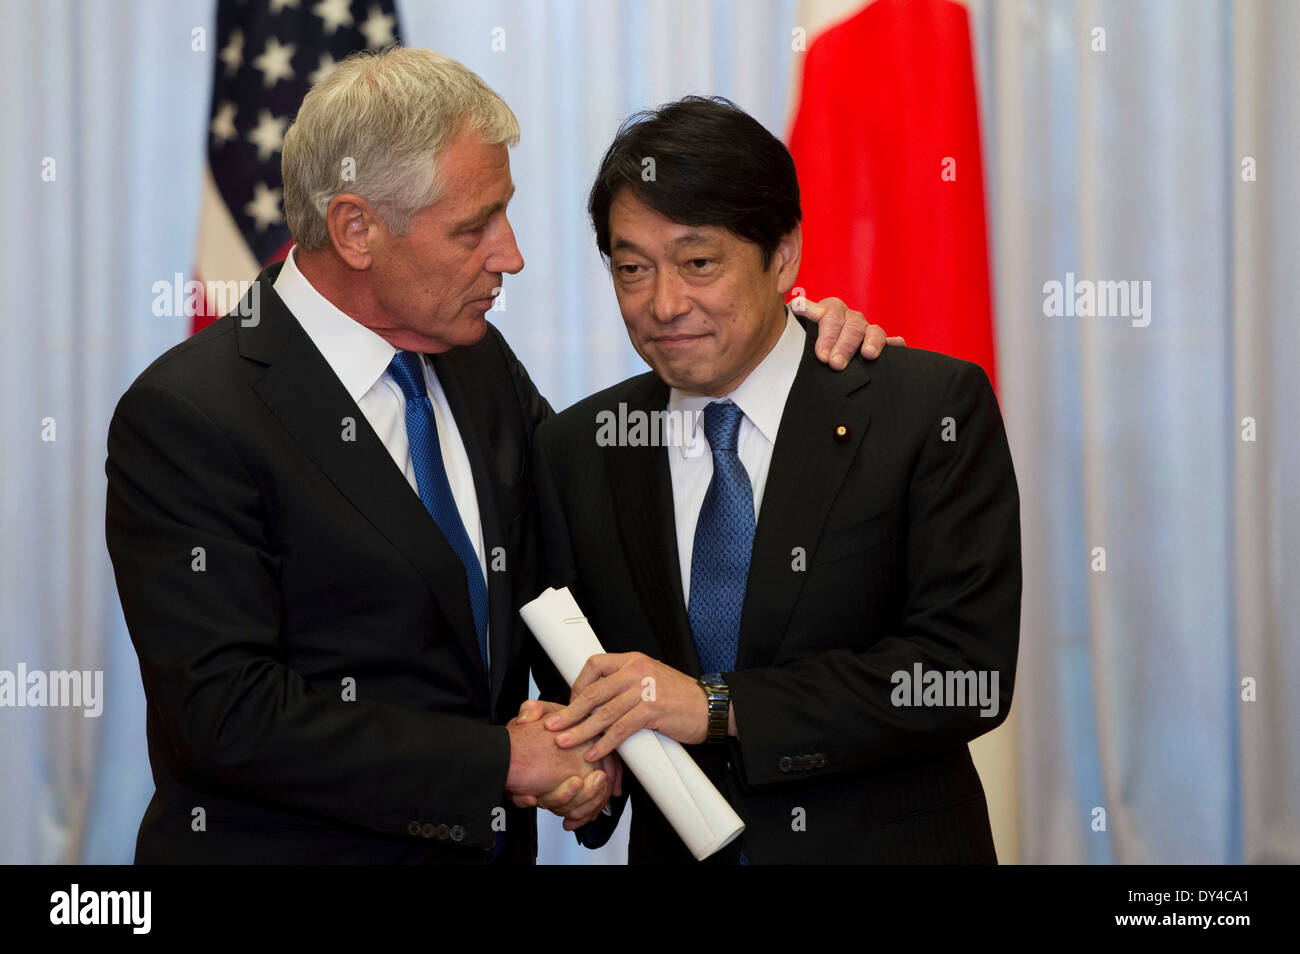 US Secretary of Defense Chuck Hagel greets Japanese Minister of Defense Itsunori Onodera at the Prime Ministers official residence Sori Daijin Kantei April 5, 2014 in Tokyo, Japan. Hagel announced the deployment of drones and missile destroyers to bolster US-Japan defense alliance. Stock Photo